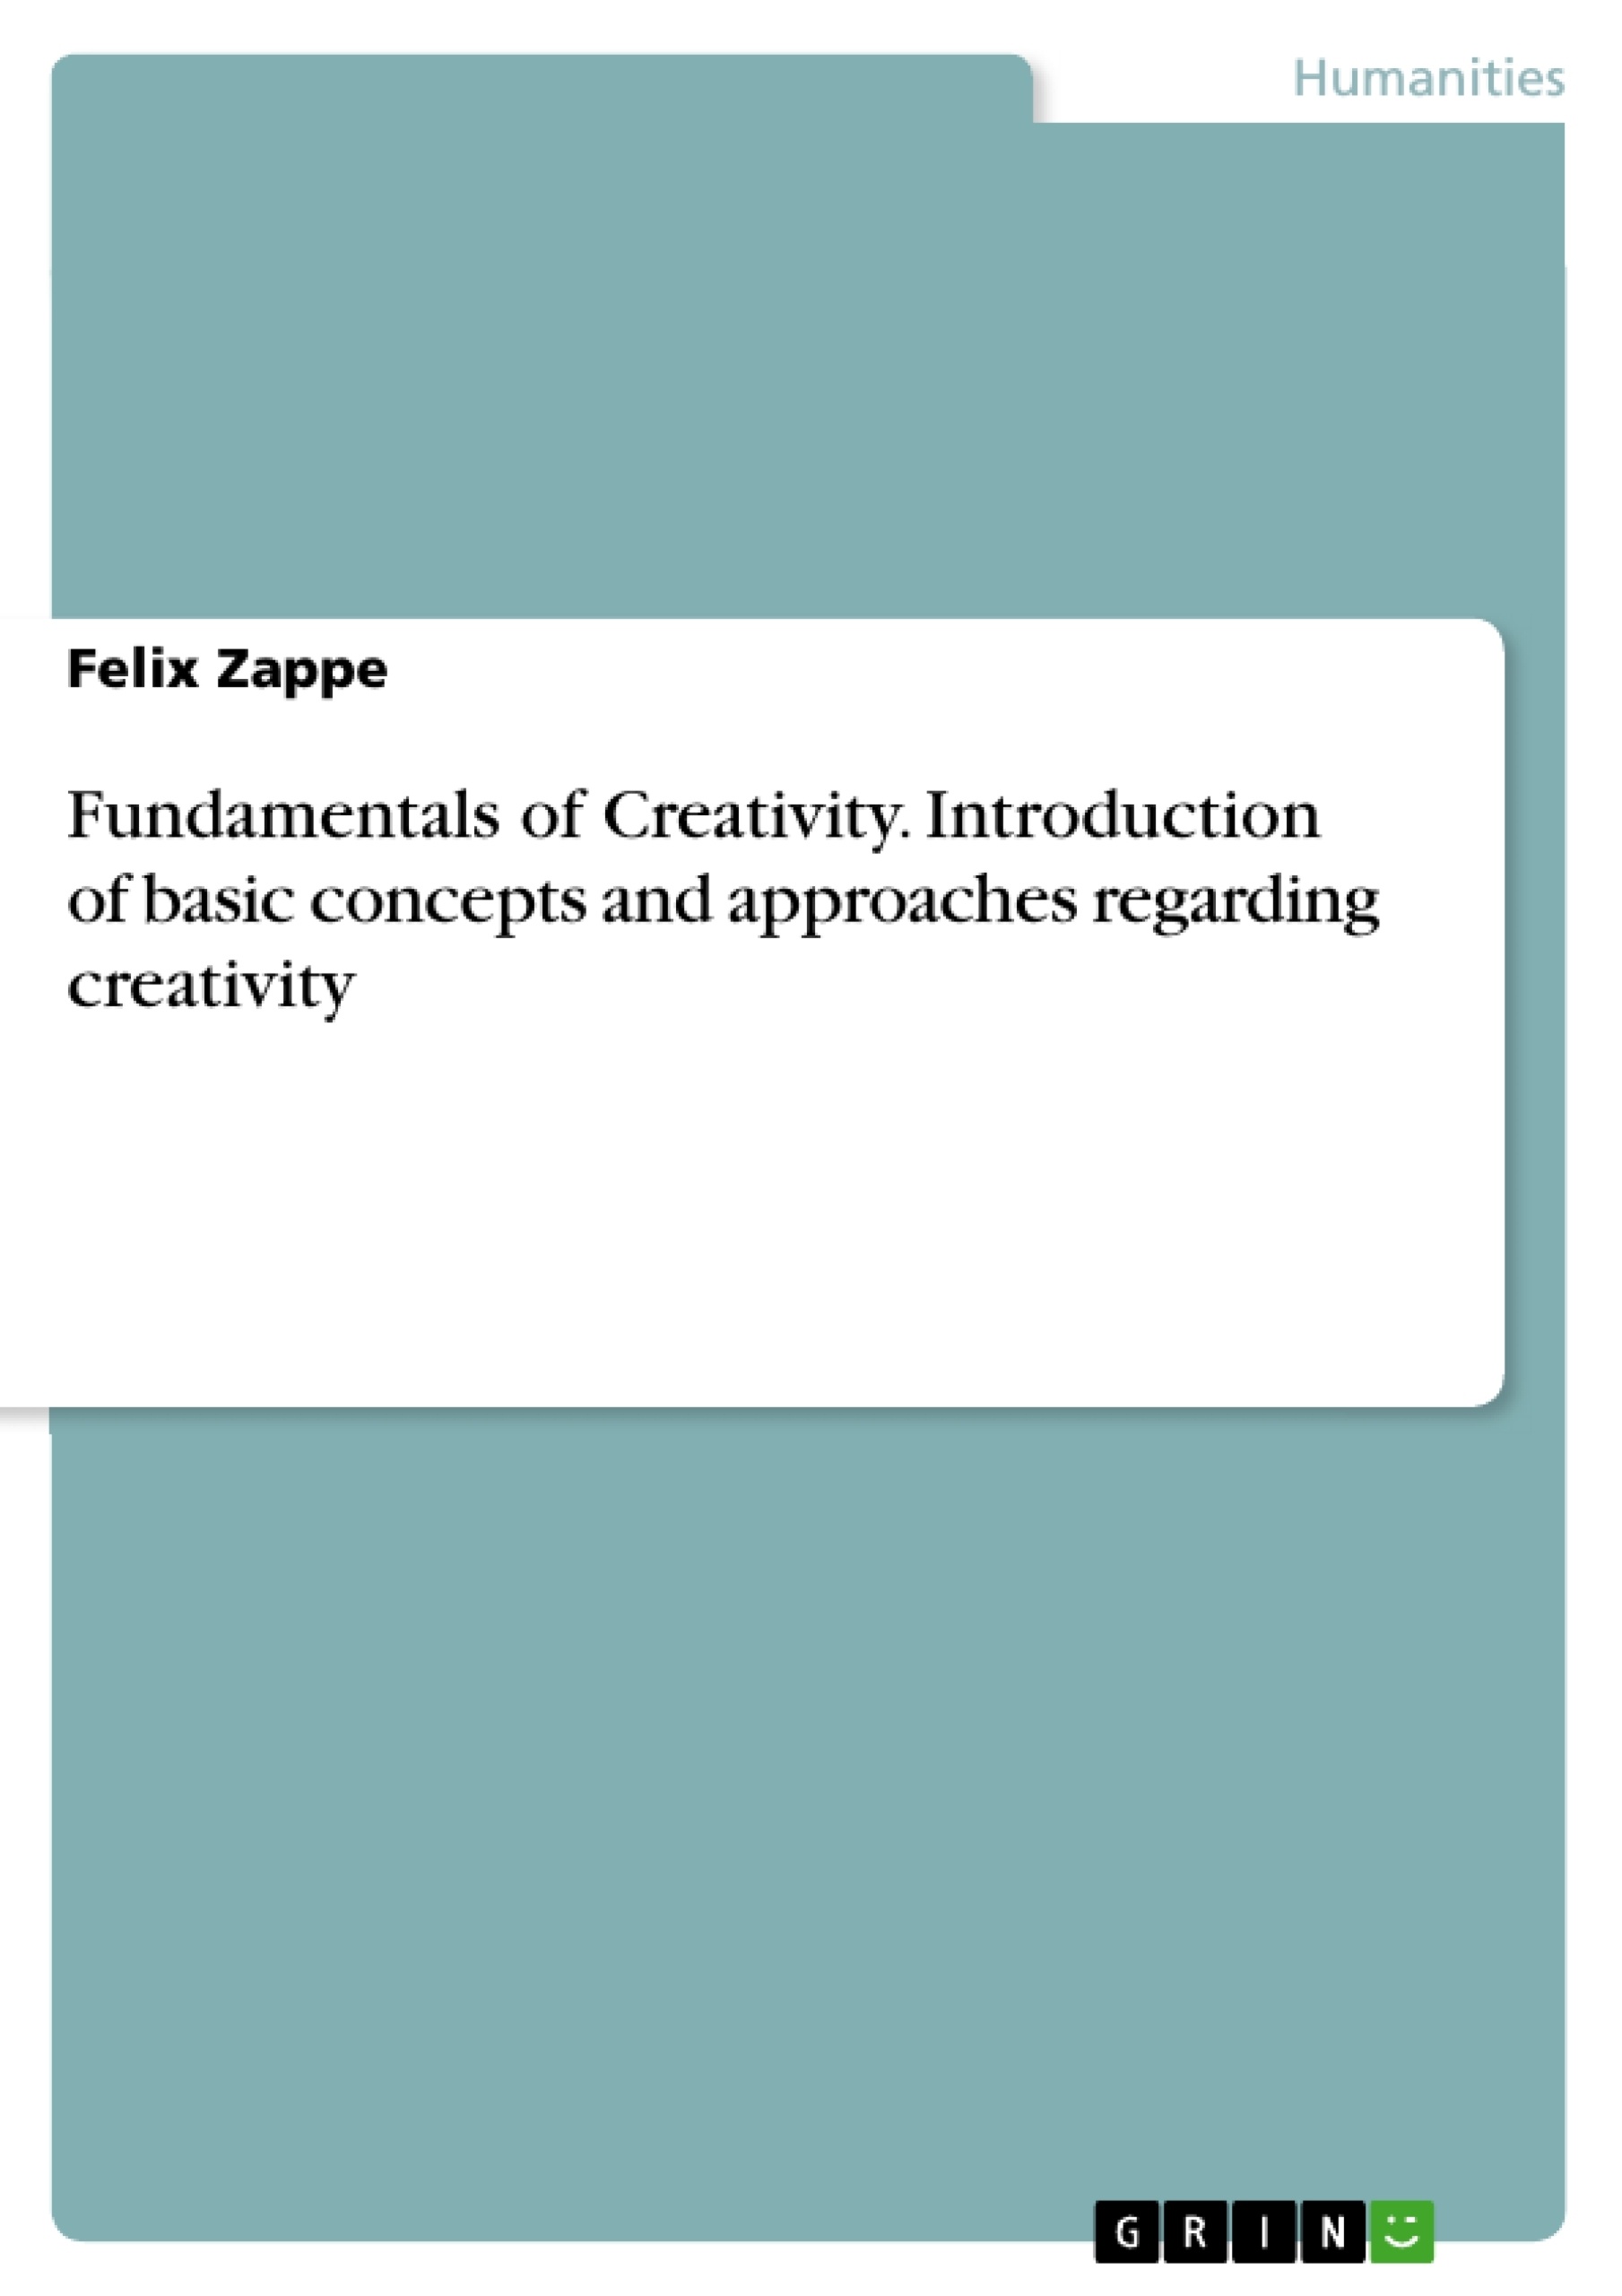 Título: Fundamentals of Creativity. Introduction of basic concepts and approaches
regarding creativity